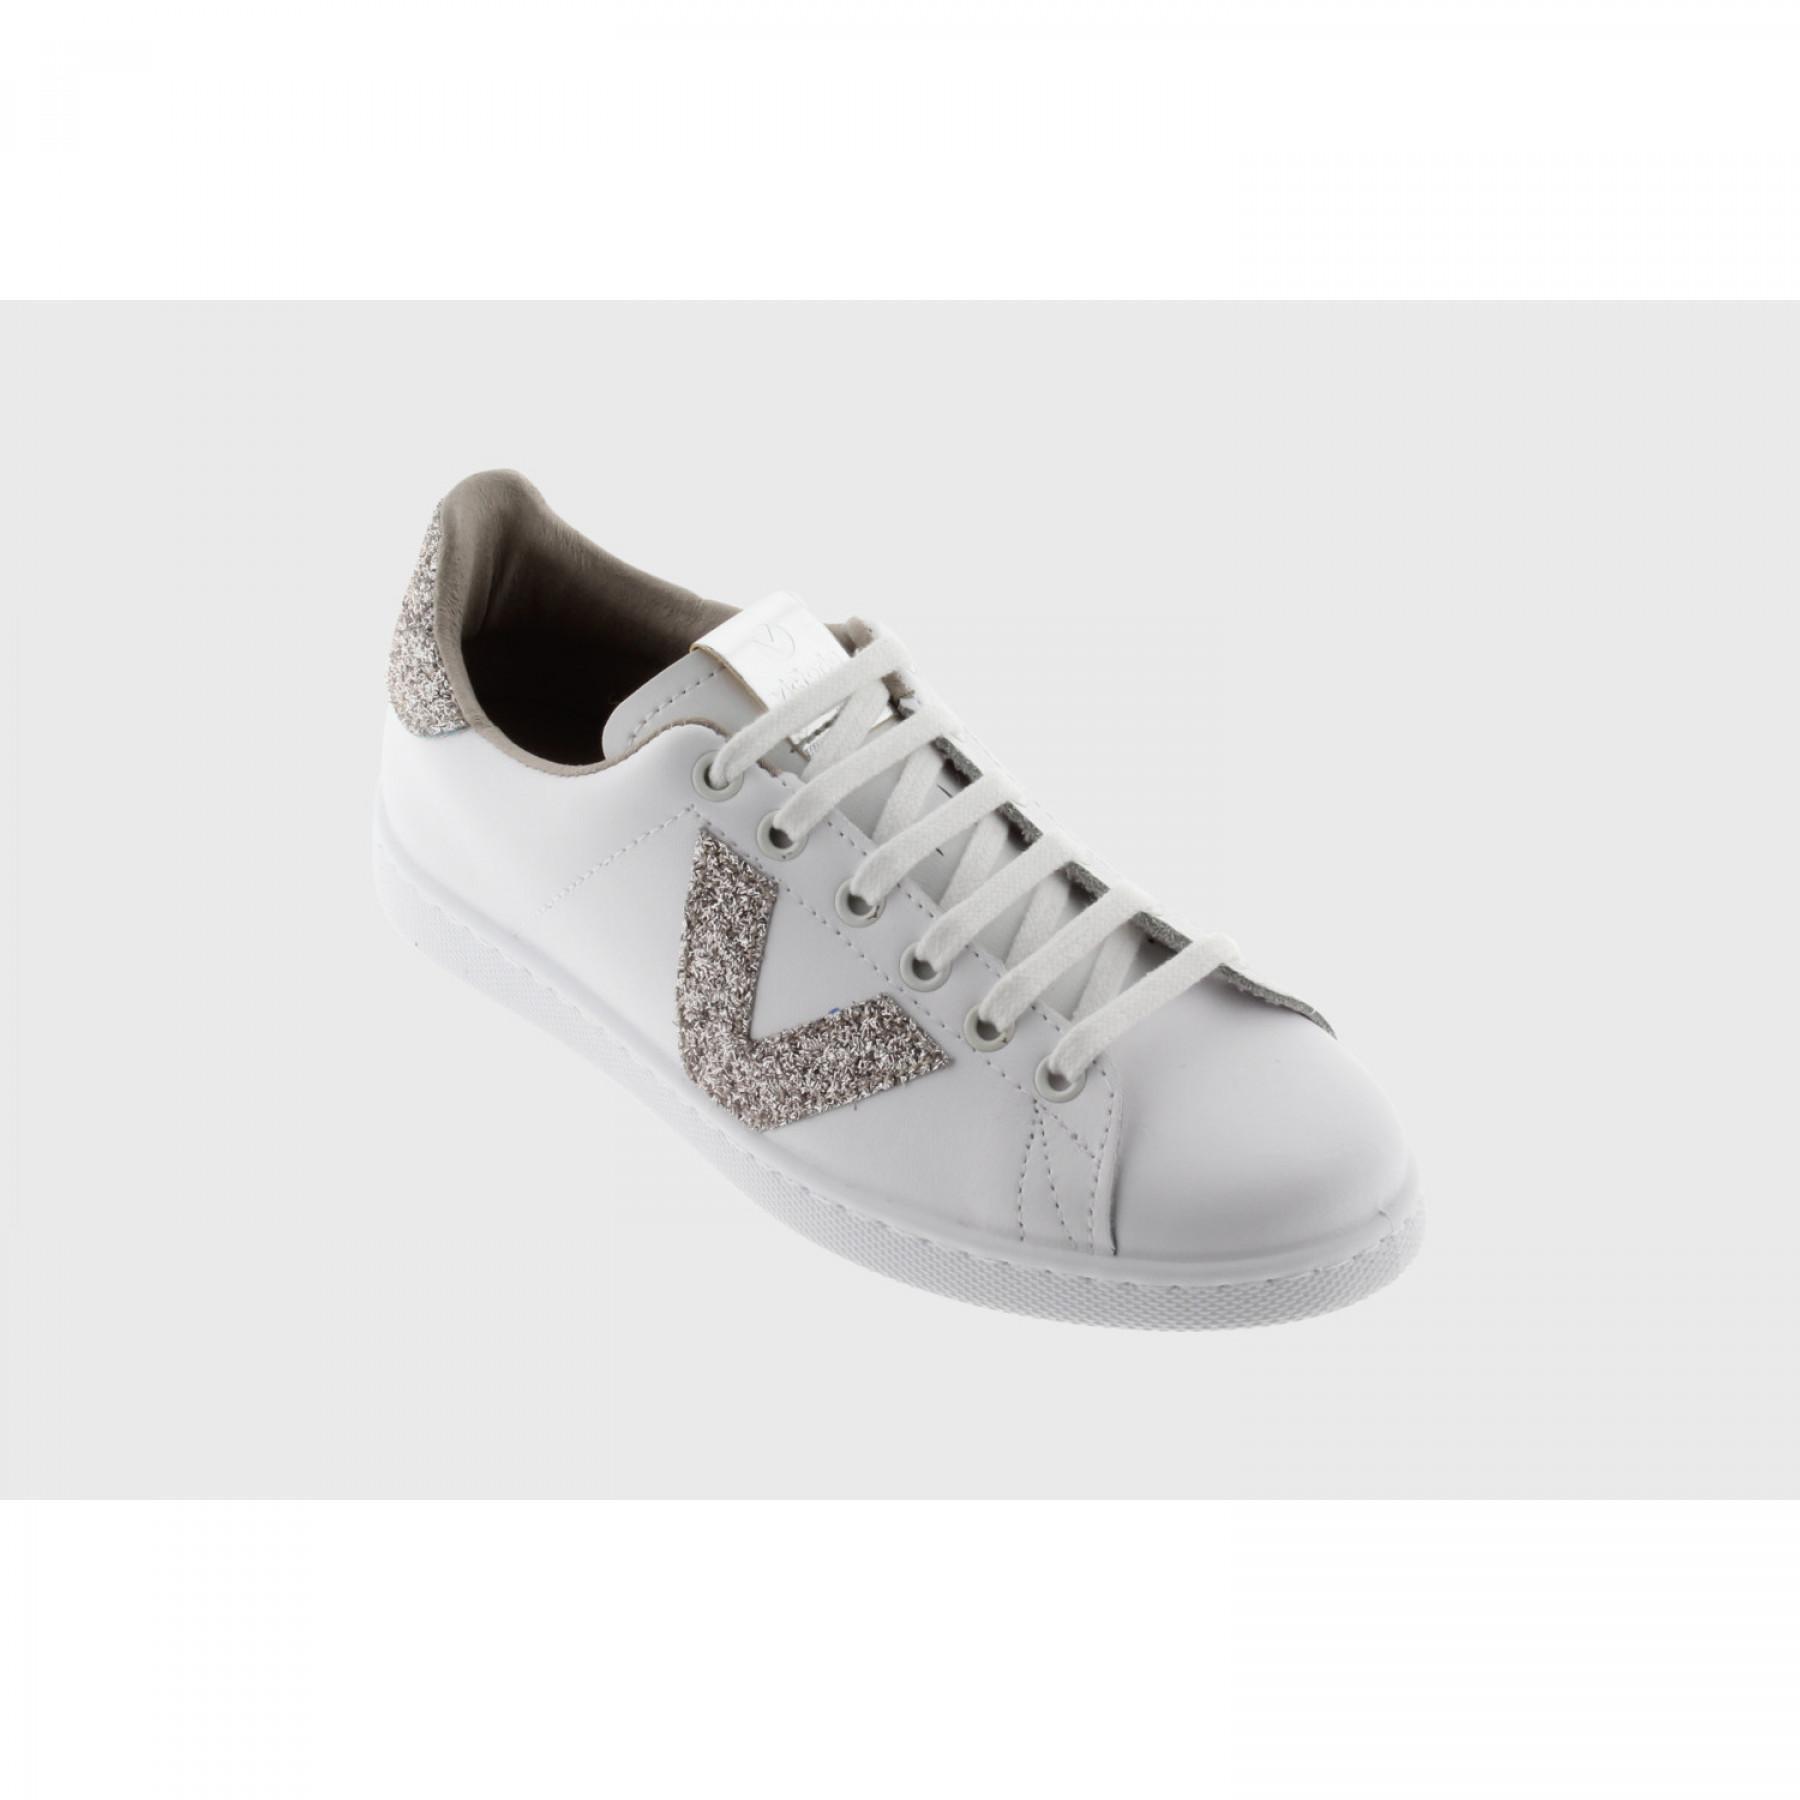 Leather sneakers Victoria tennis glitter